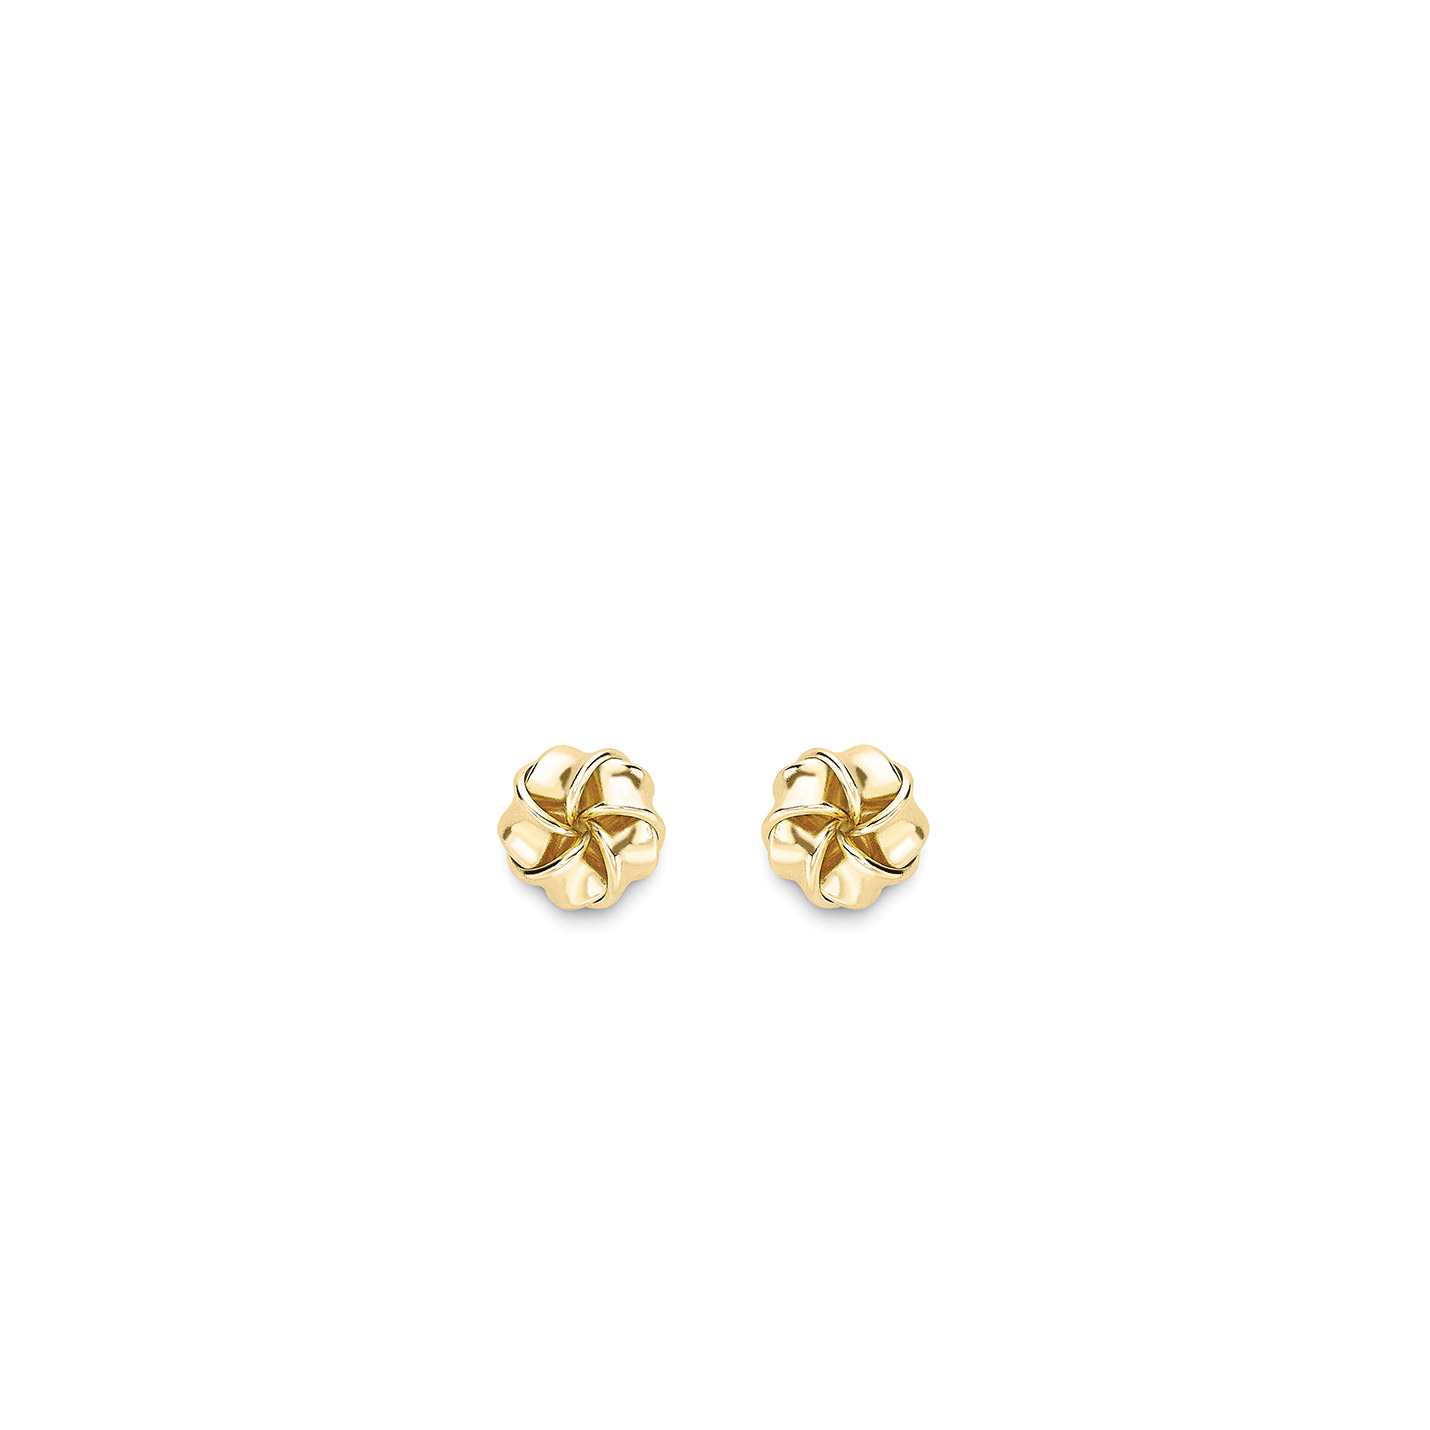 Yellow Gold Polished Flower Knot Stud Earrings